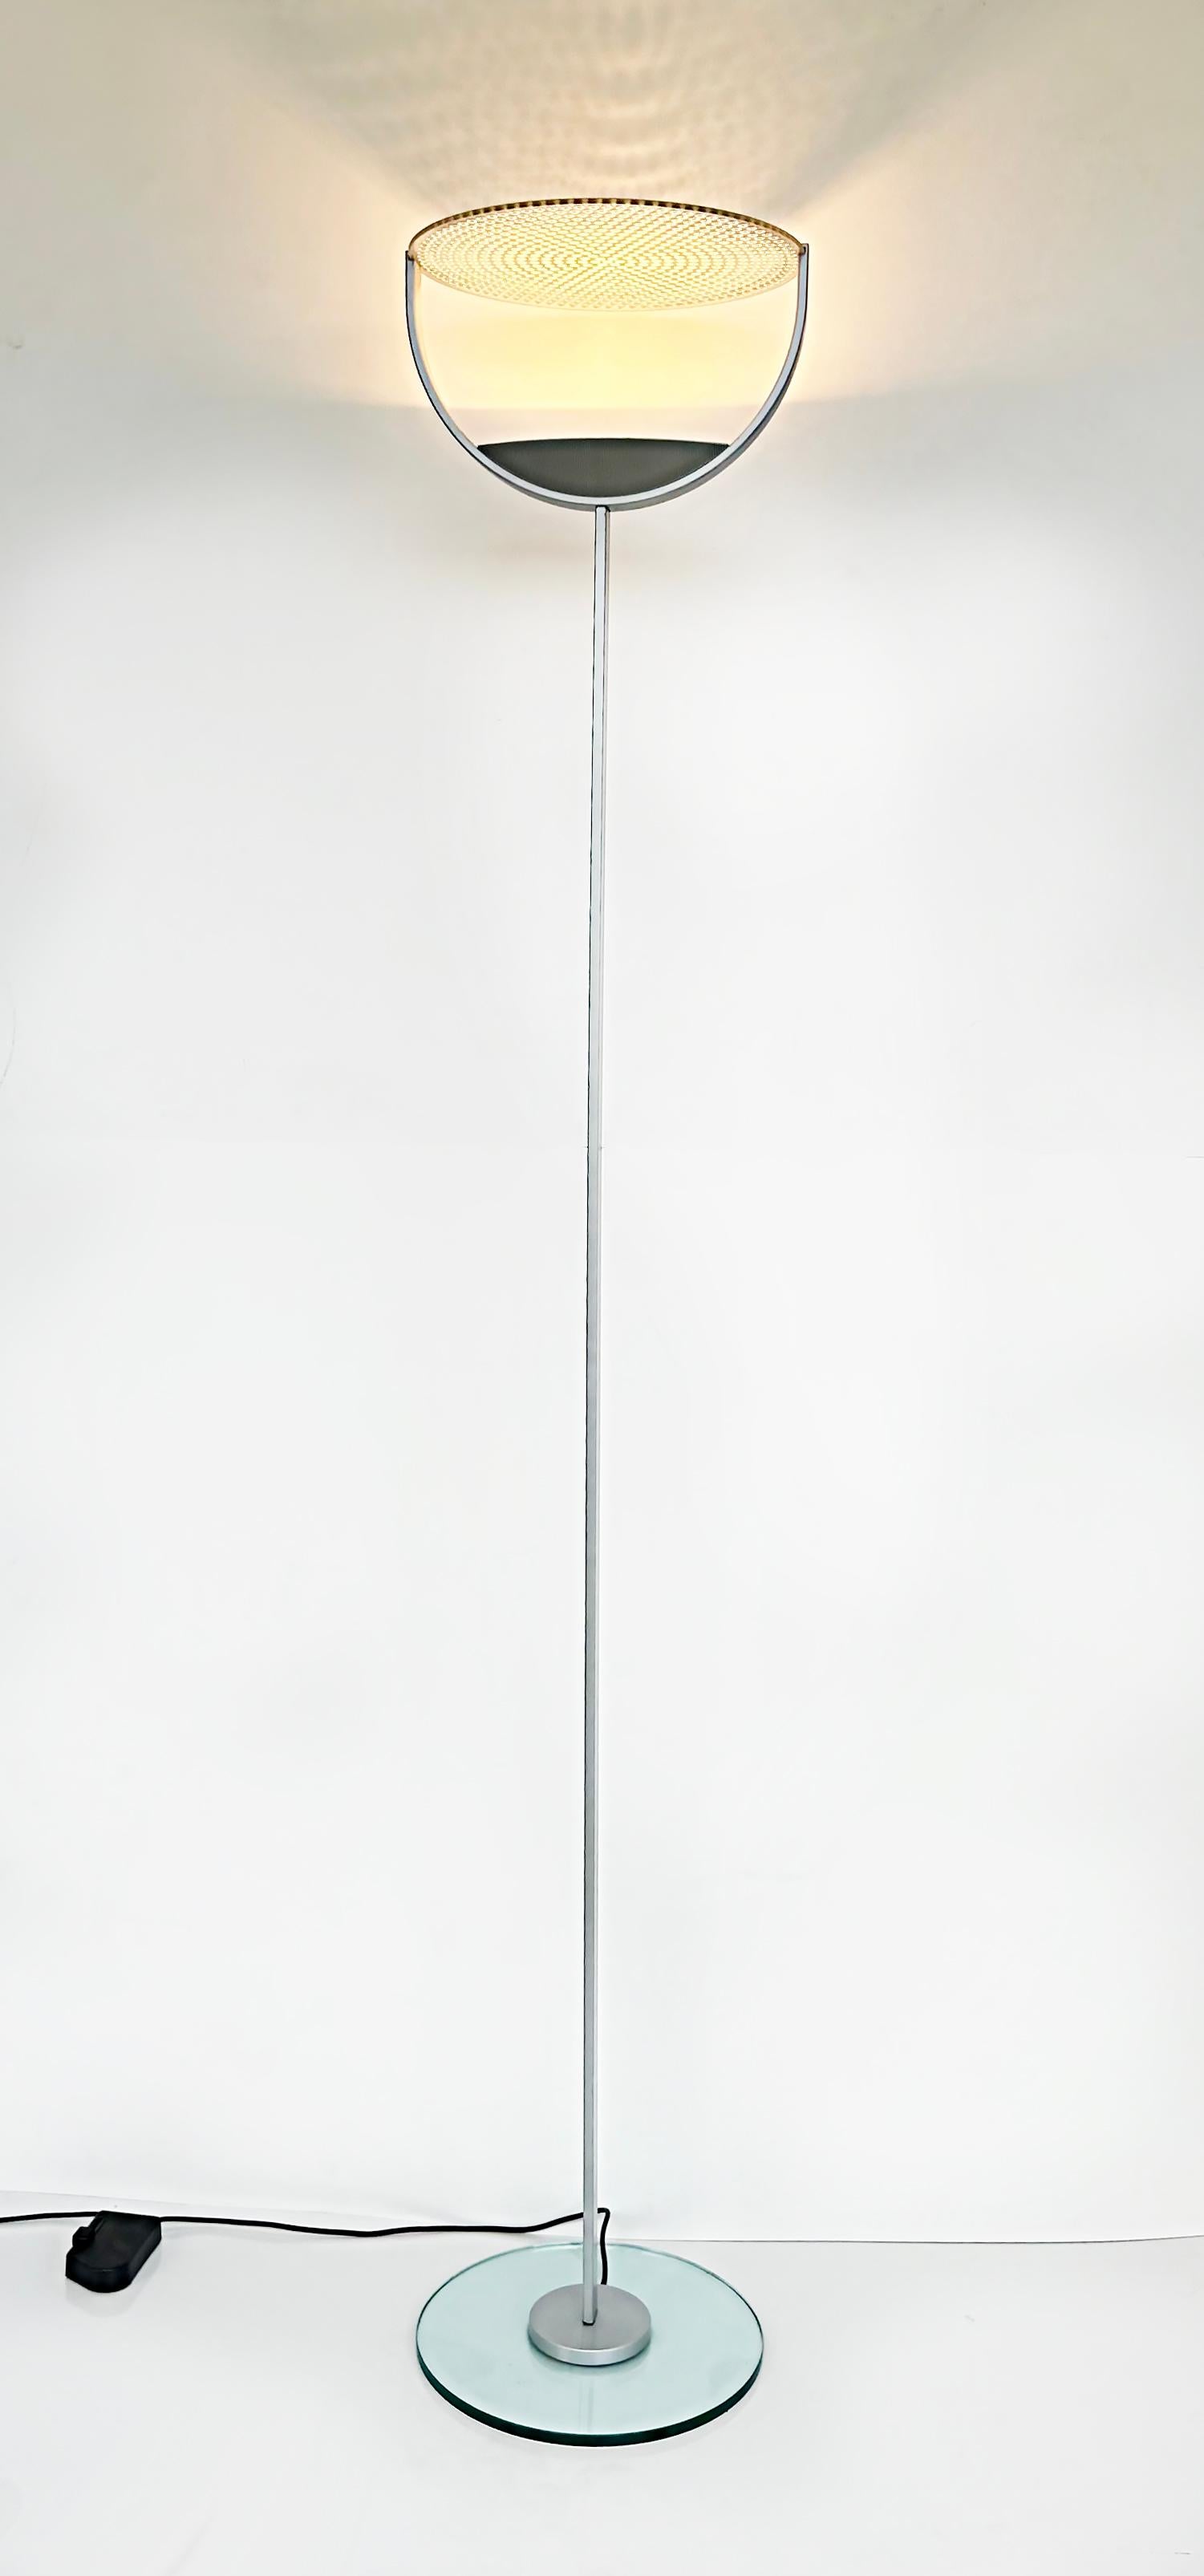 Franco Bettonica, Mario Melocchi Cini & Nils Mixa floor lamp, Italy.

Offered for sale is a 